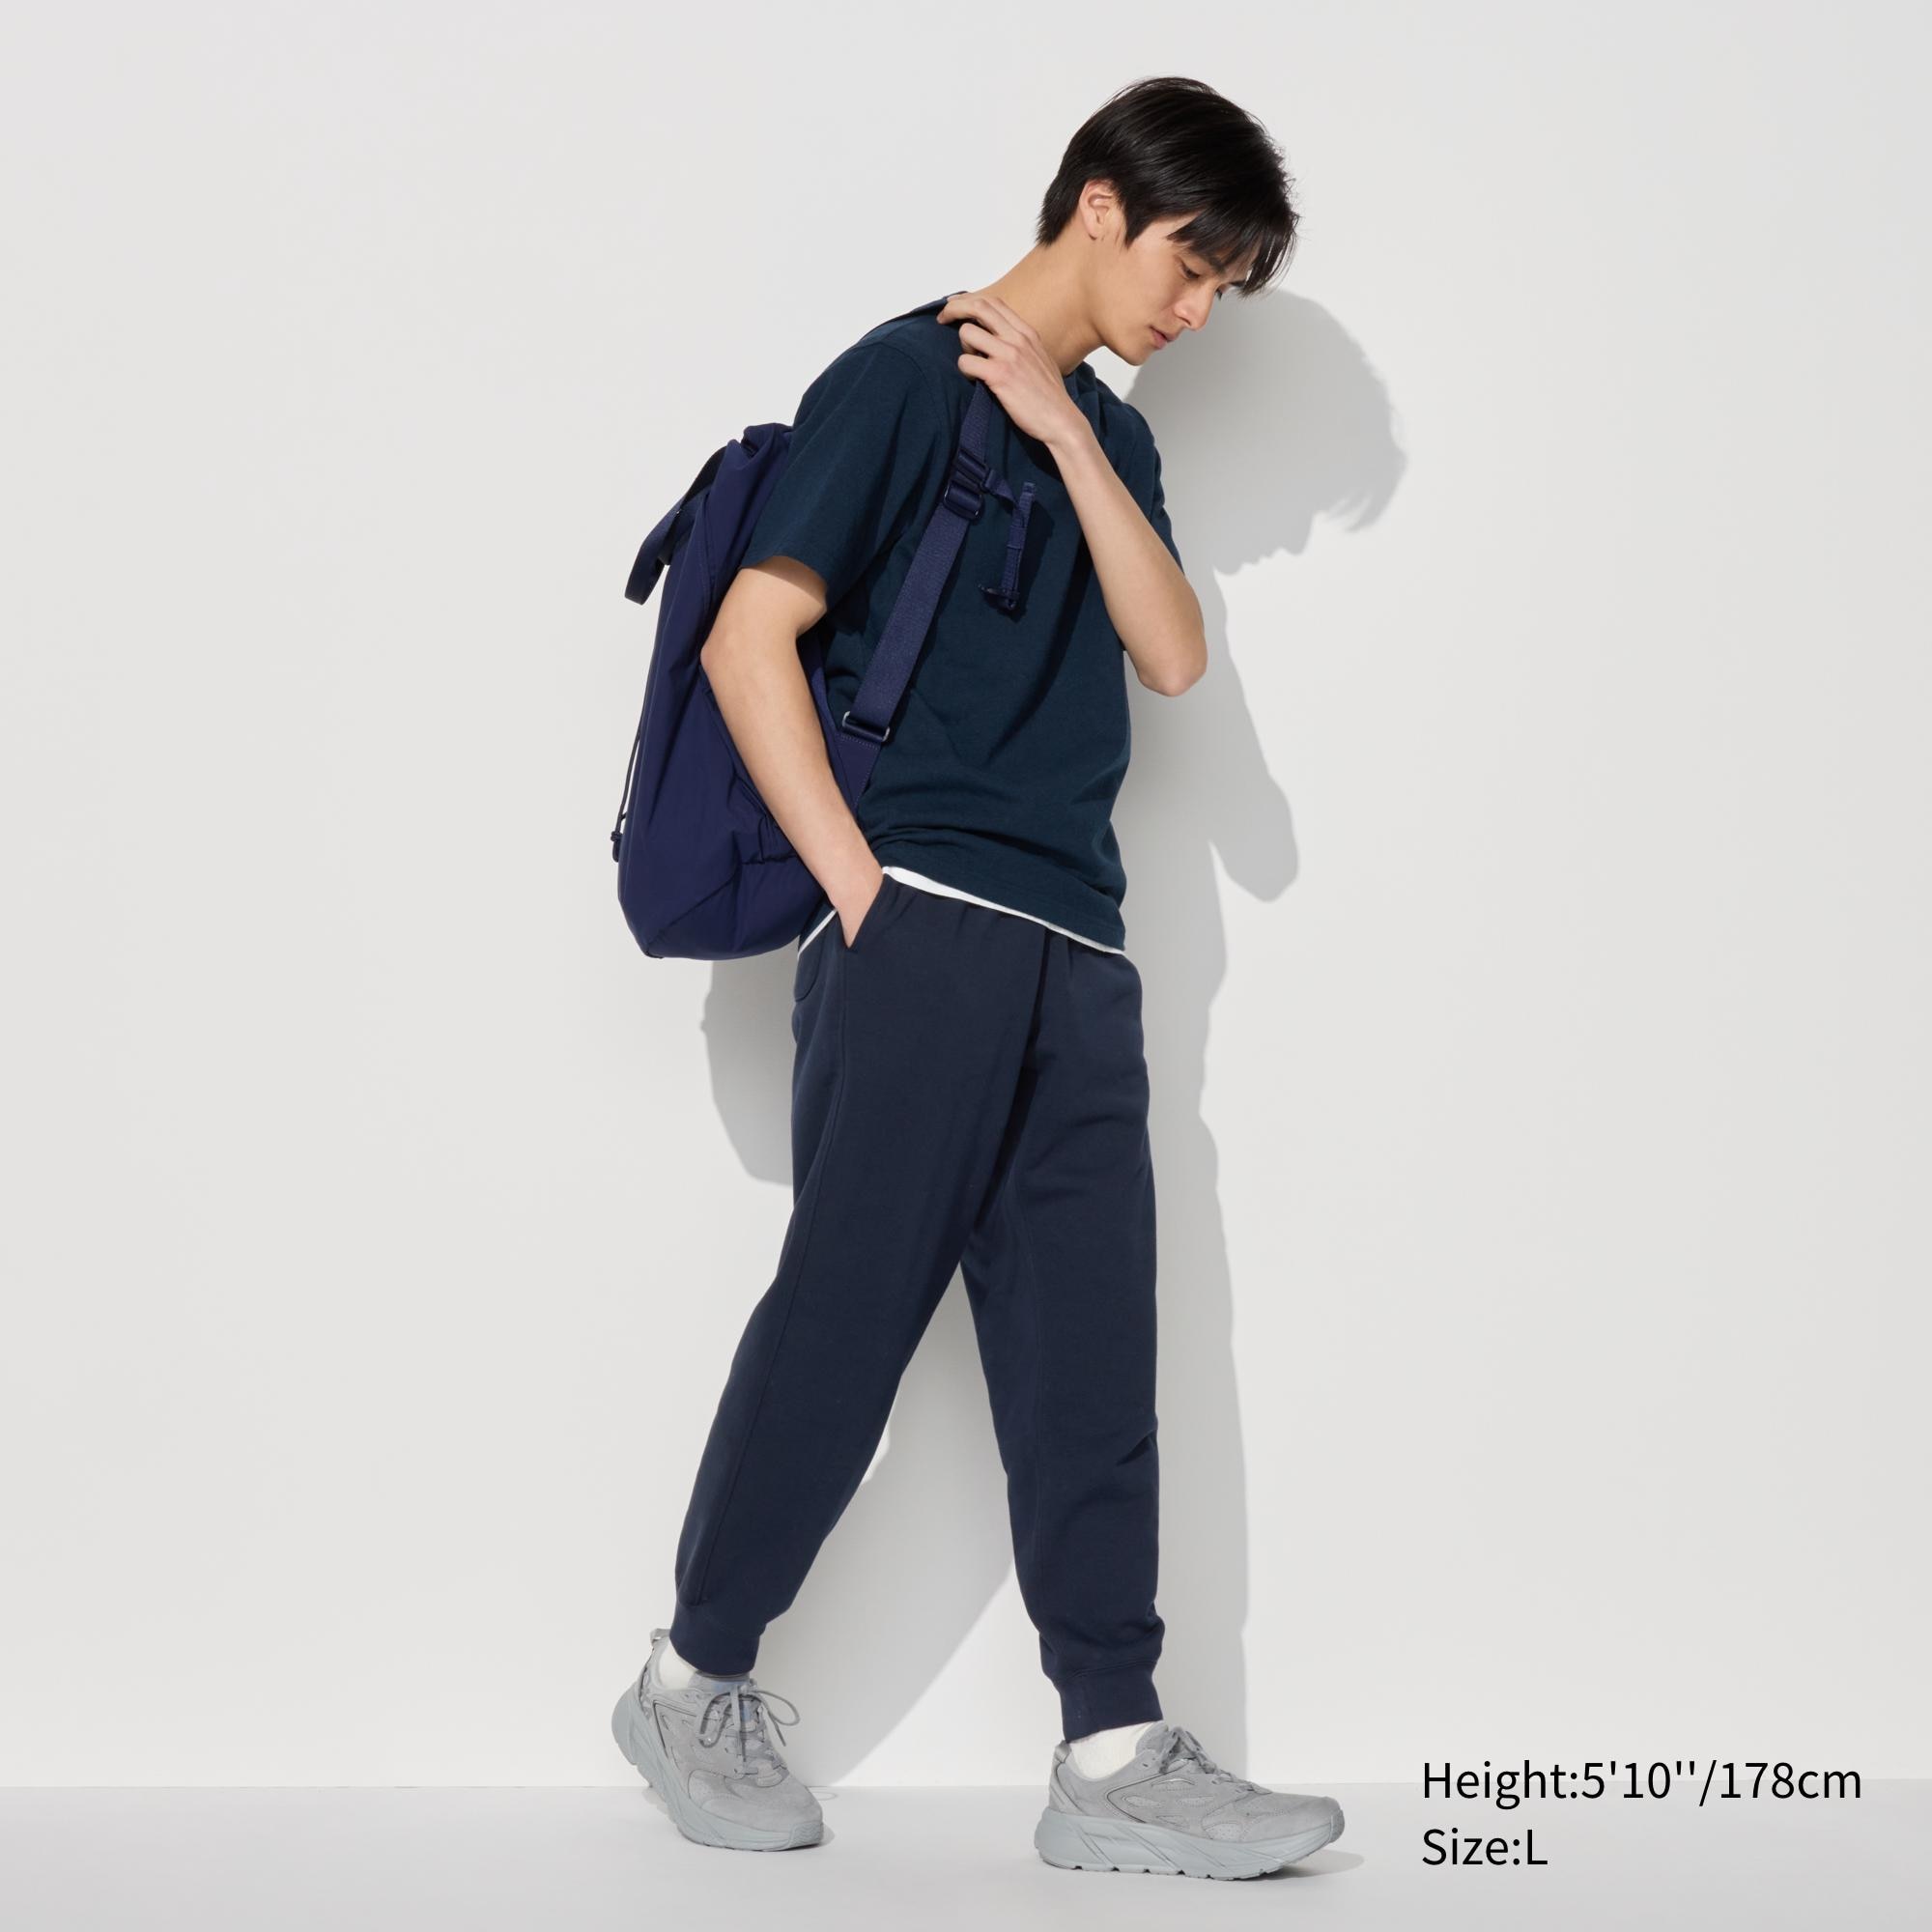 Cotton Relaxed Ankle Pants  UNIQLO US